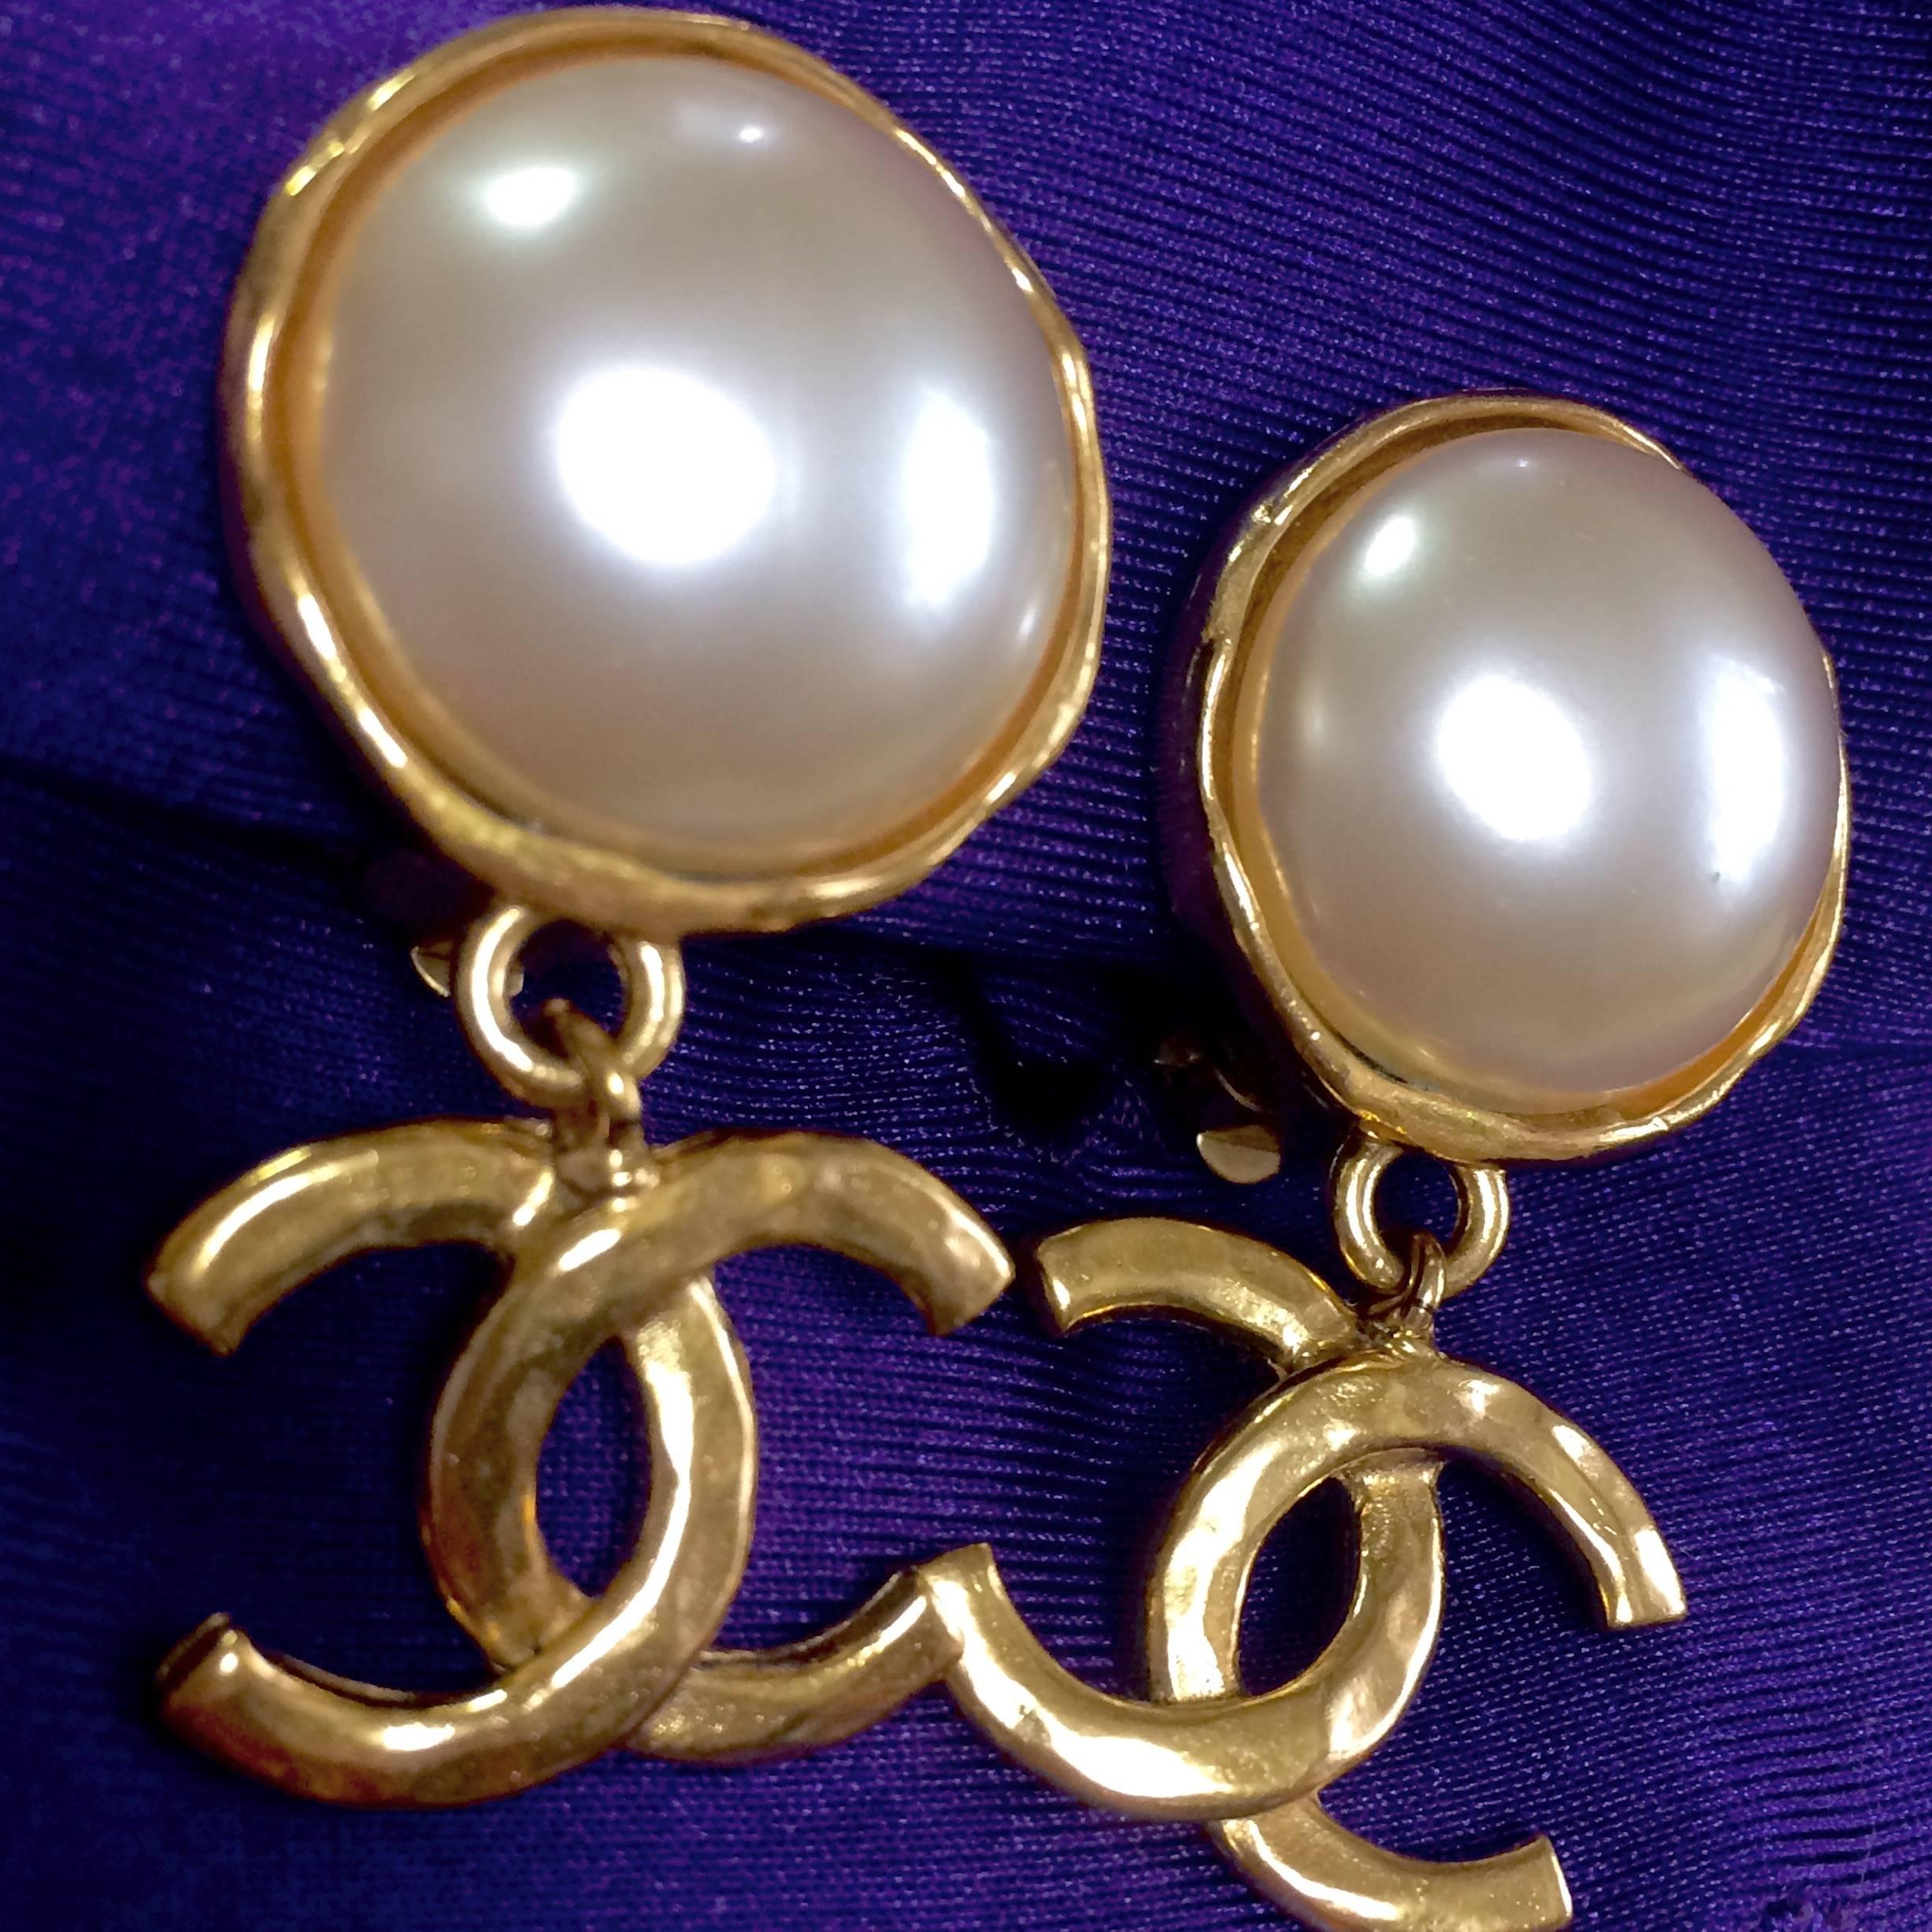 1990s. Vintage CHANEL classic round white faux pearl and golden CC dangling earrings. Iconic CC mark. Hot gift.

Introducing another classic  vintage CHANEL jewelry,  white faux pearl earrings with golden CC marks that dangle as you move!
 
Wearing